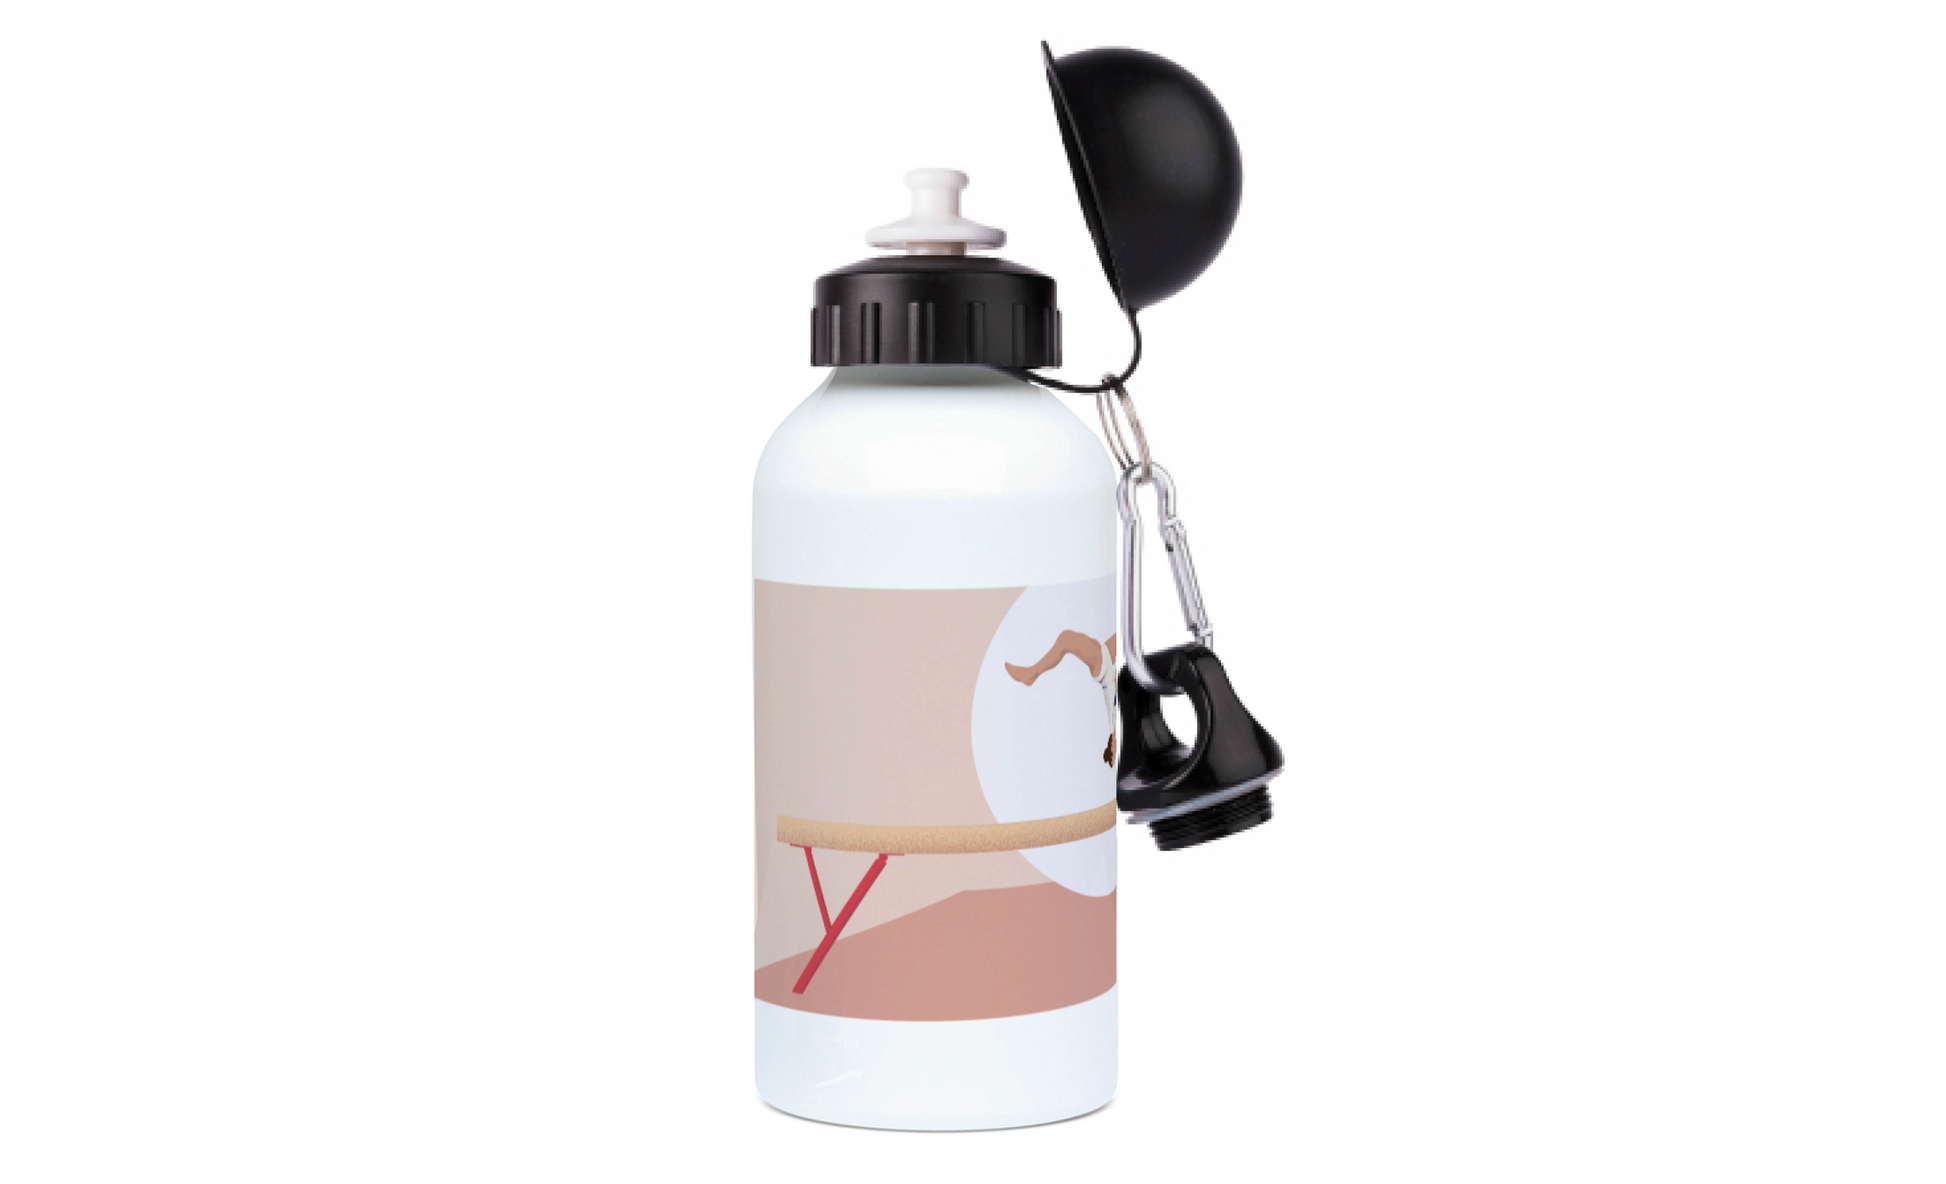 a white water bottle with a picture of a bird on it